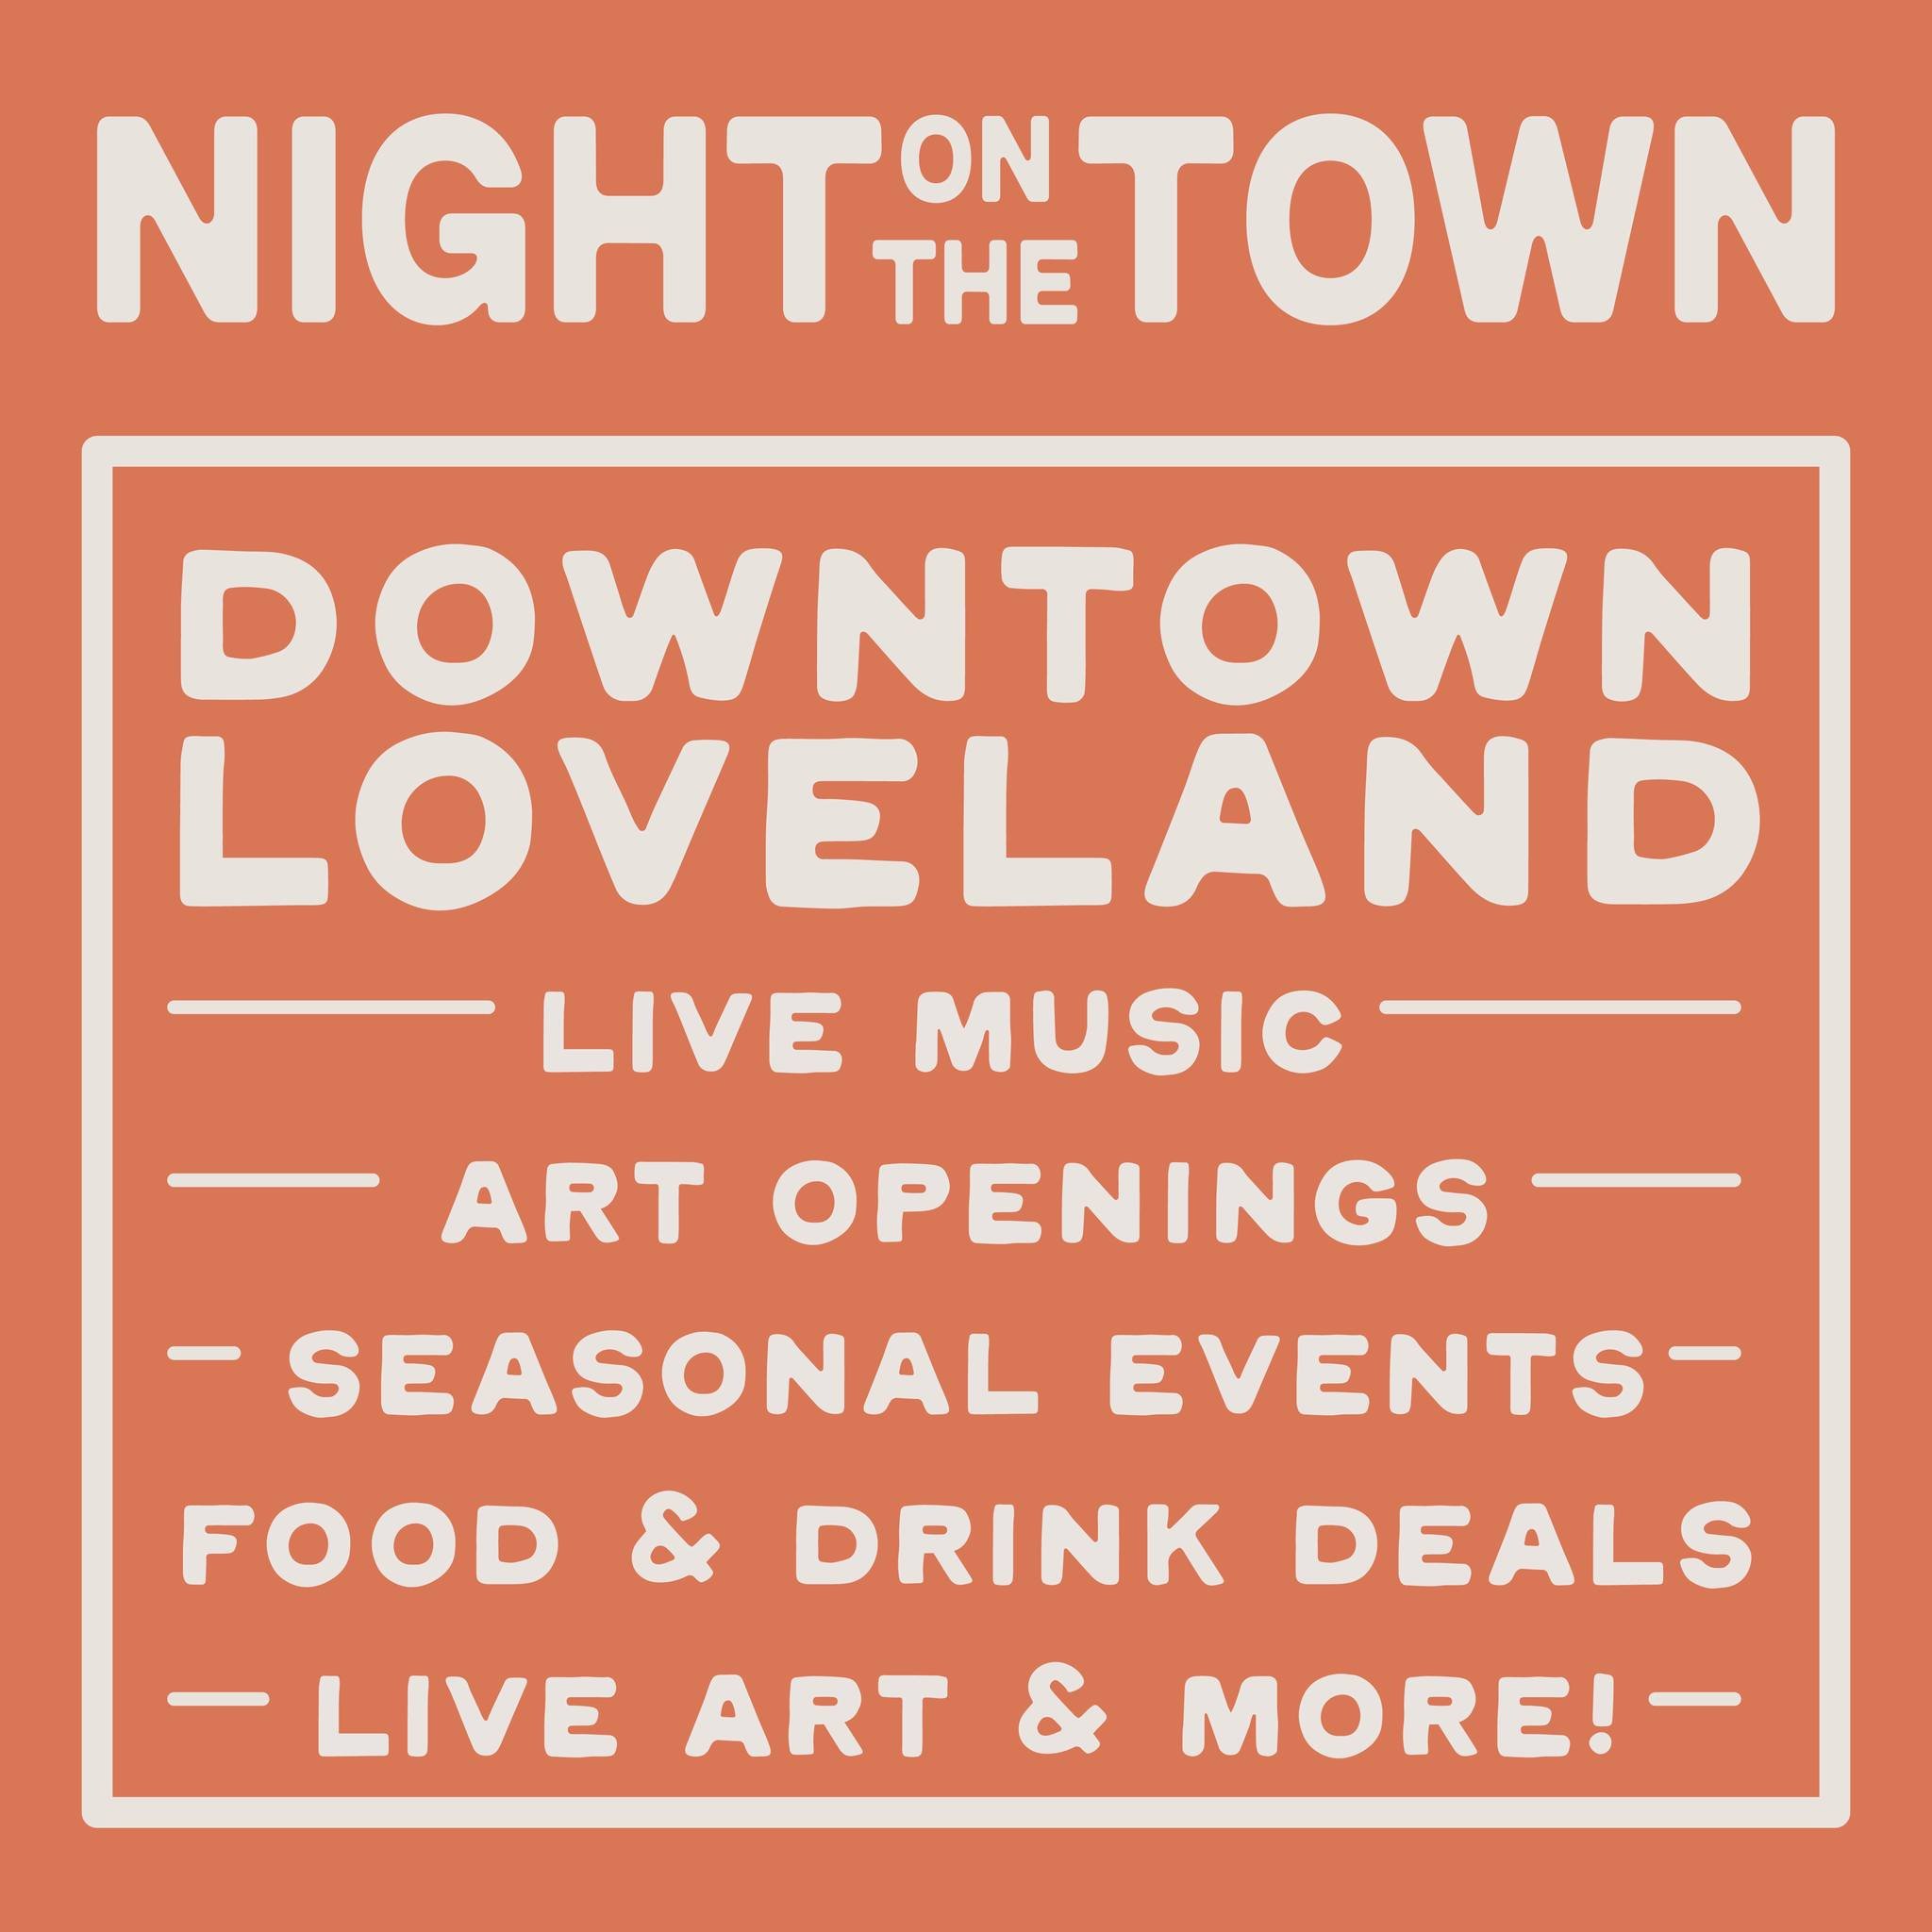 Starting this month, you'll find artists and musicians out on the streets of Downtown Loveland during Night on the Town! Mark your calendar for Friday, May 10th! Come downtown to check out multiple art openings, downtown events, plus bars and restaur